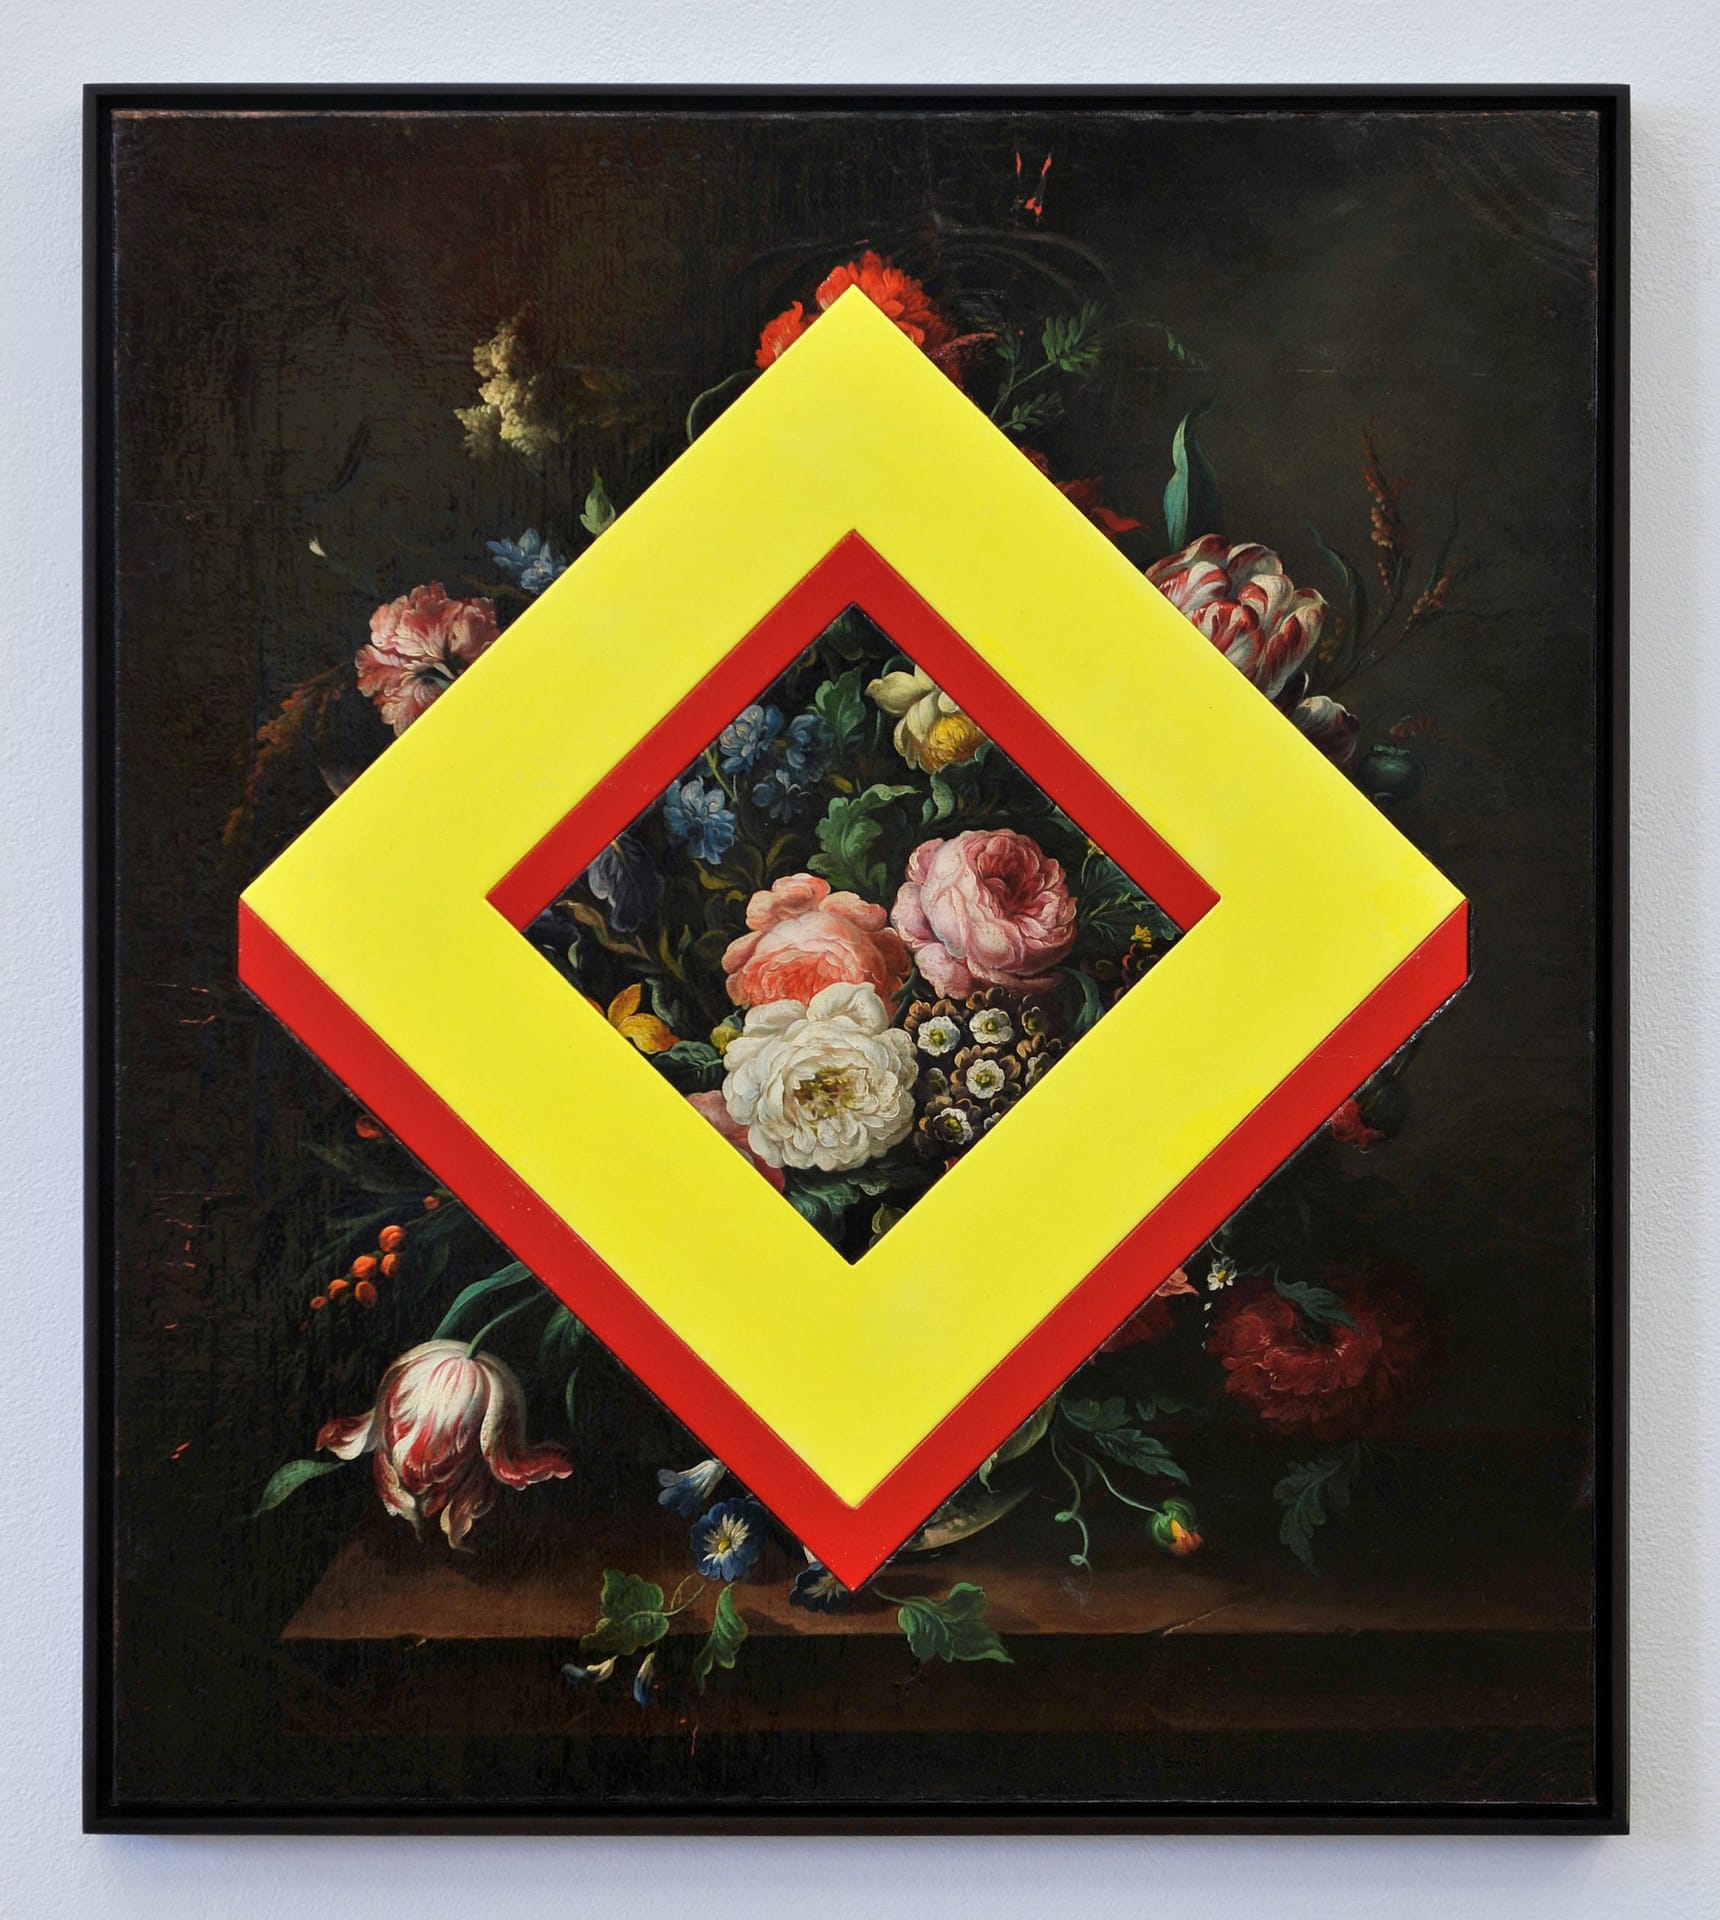 Image: A yellow diamond on an antique photo of flowers. Representing: Famine victims: yellow - 1860 and red - 2000. The first of many images made by Stefan Sagmeister to prove the world is getting better.